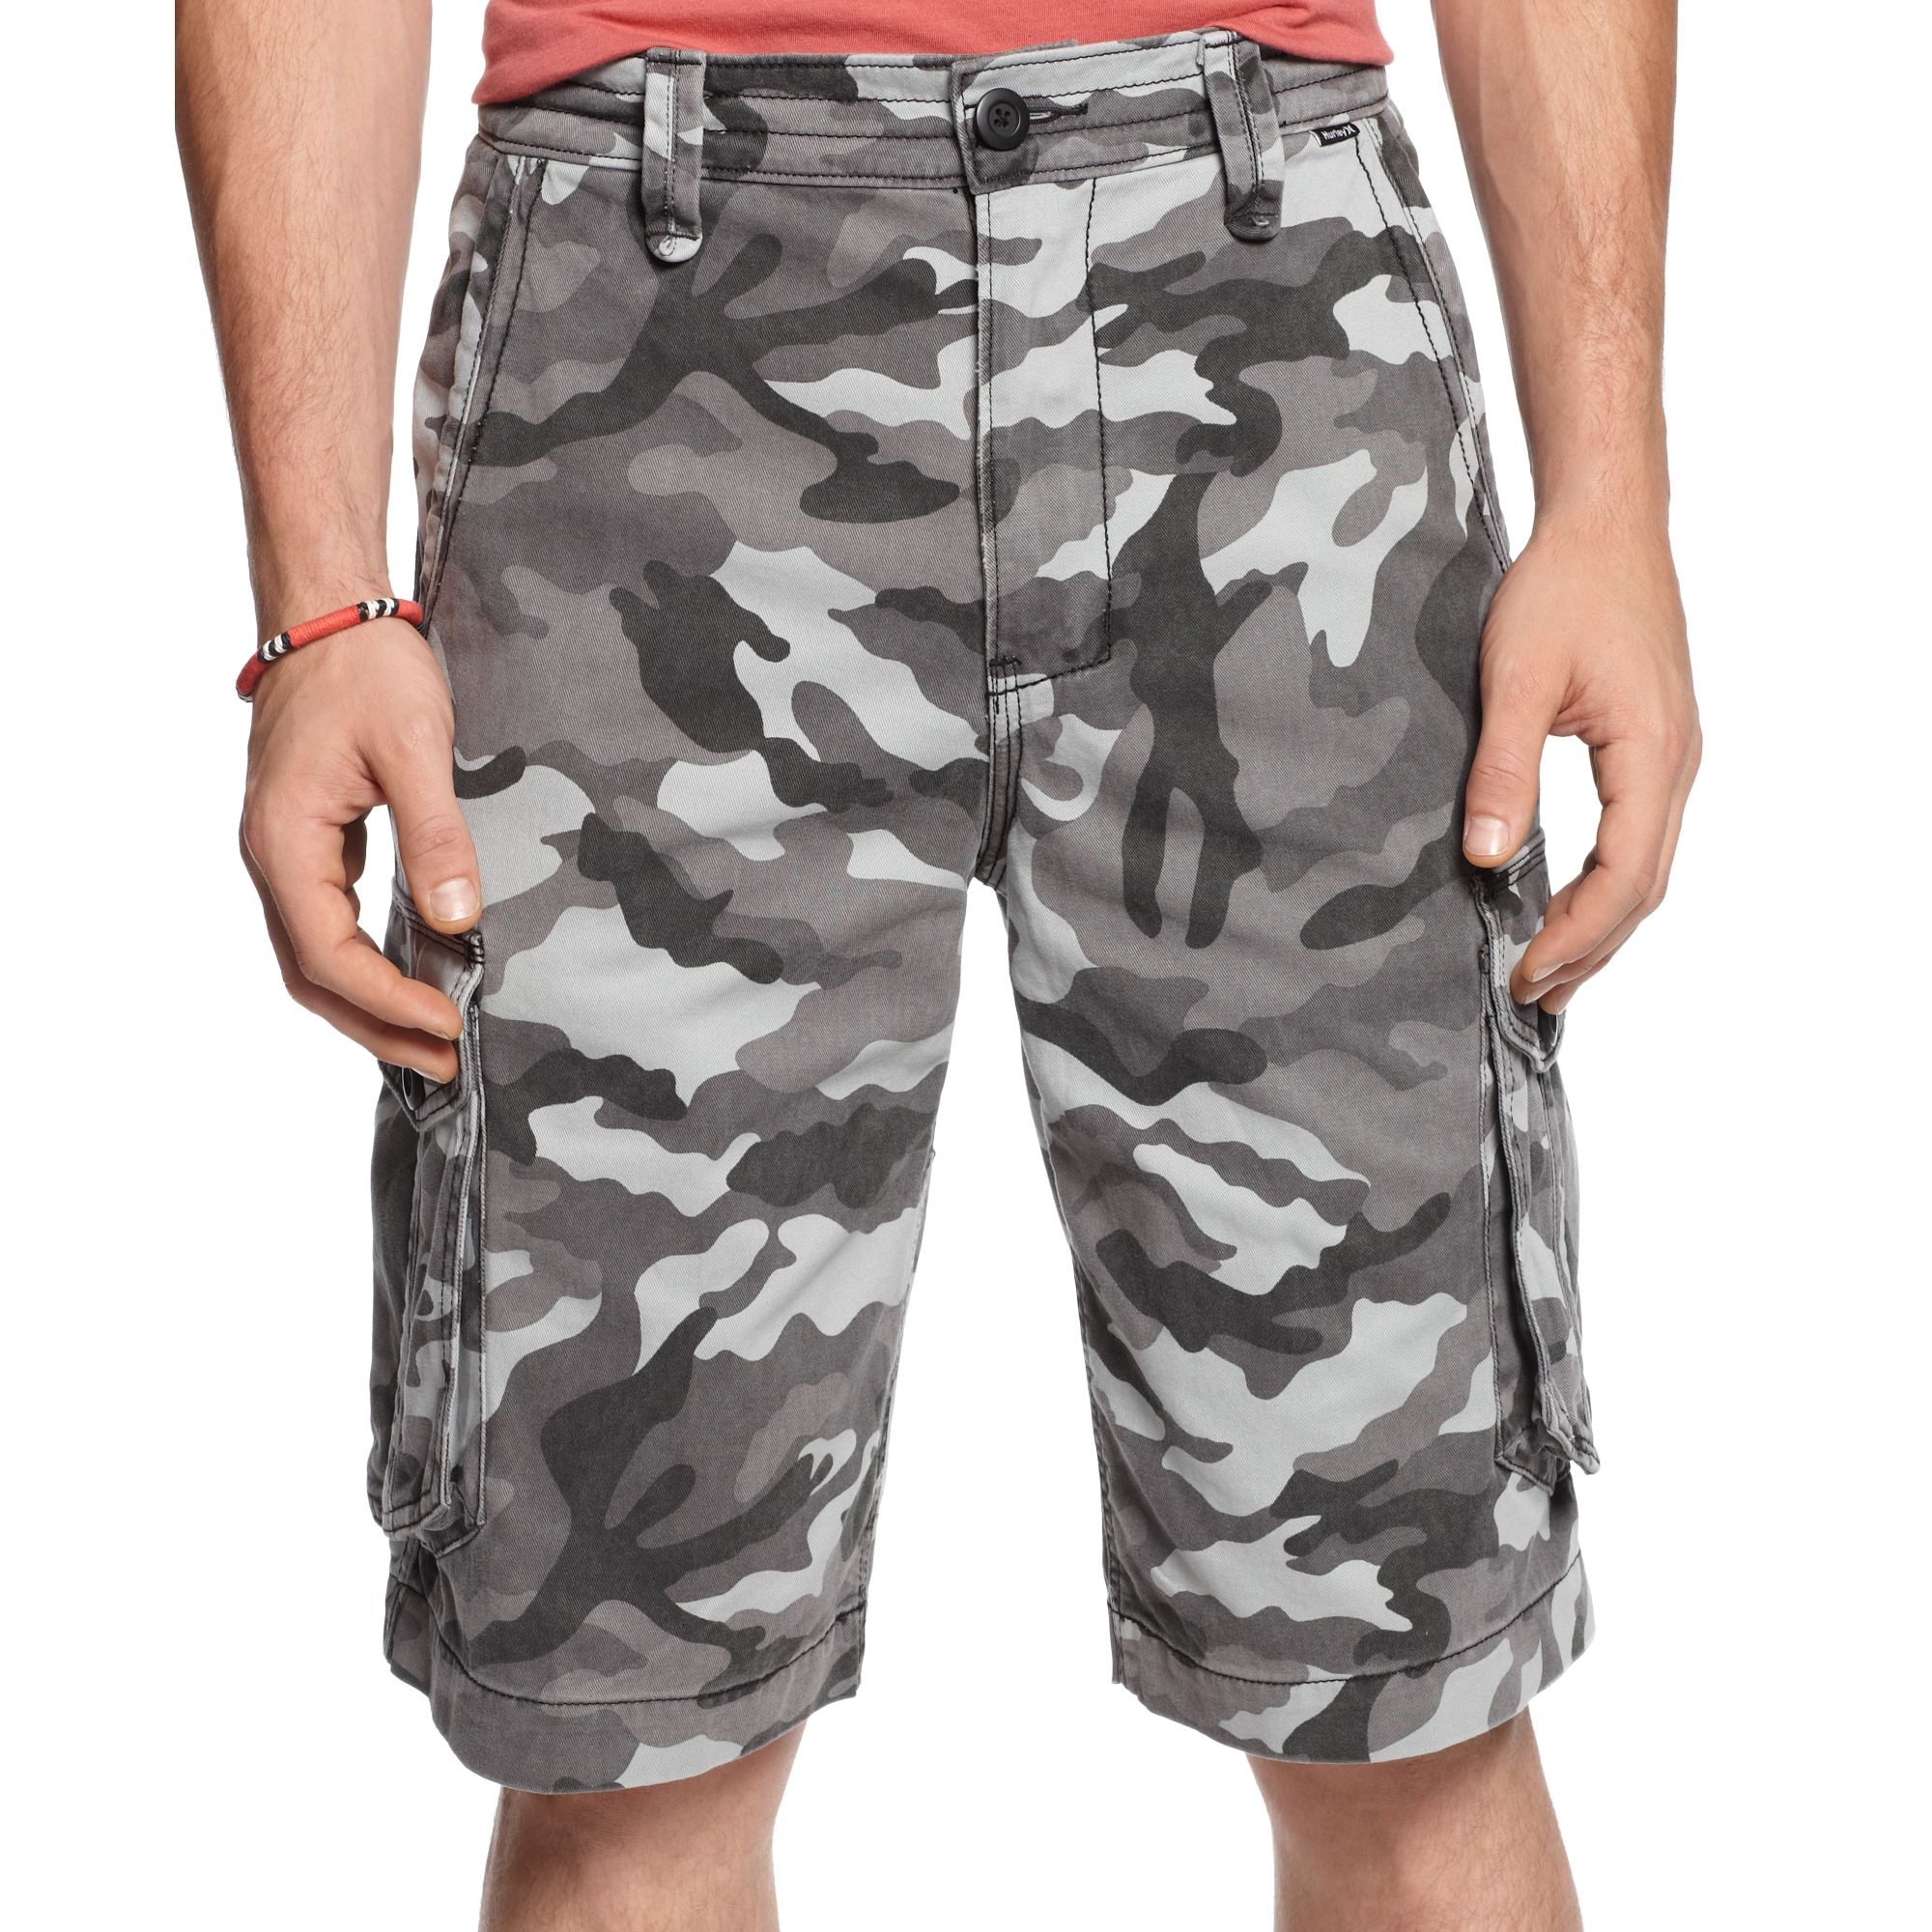 Lyst - Hurley One Only Camo Cargo Shorts in Gray for Men